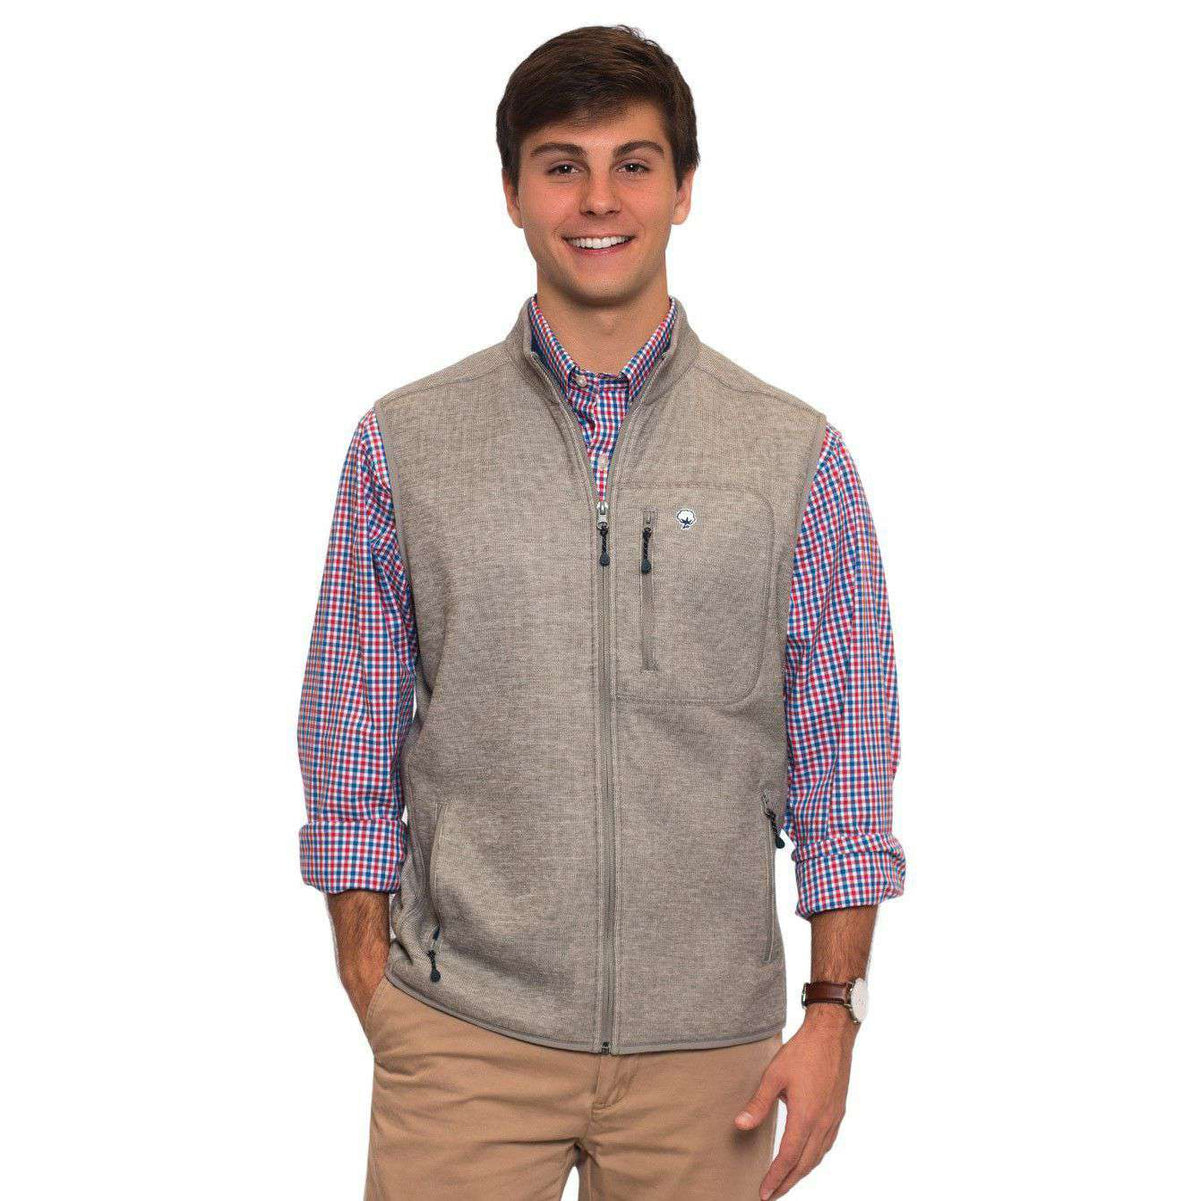 Keeler Vest in Heather Grey by The Southern Shirt Co. - Country Club Prep